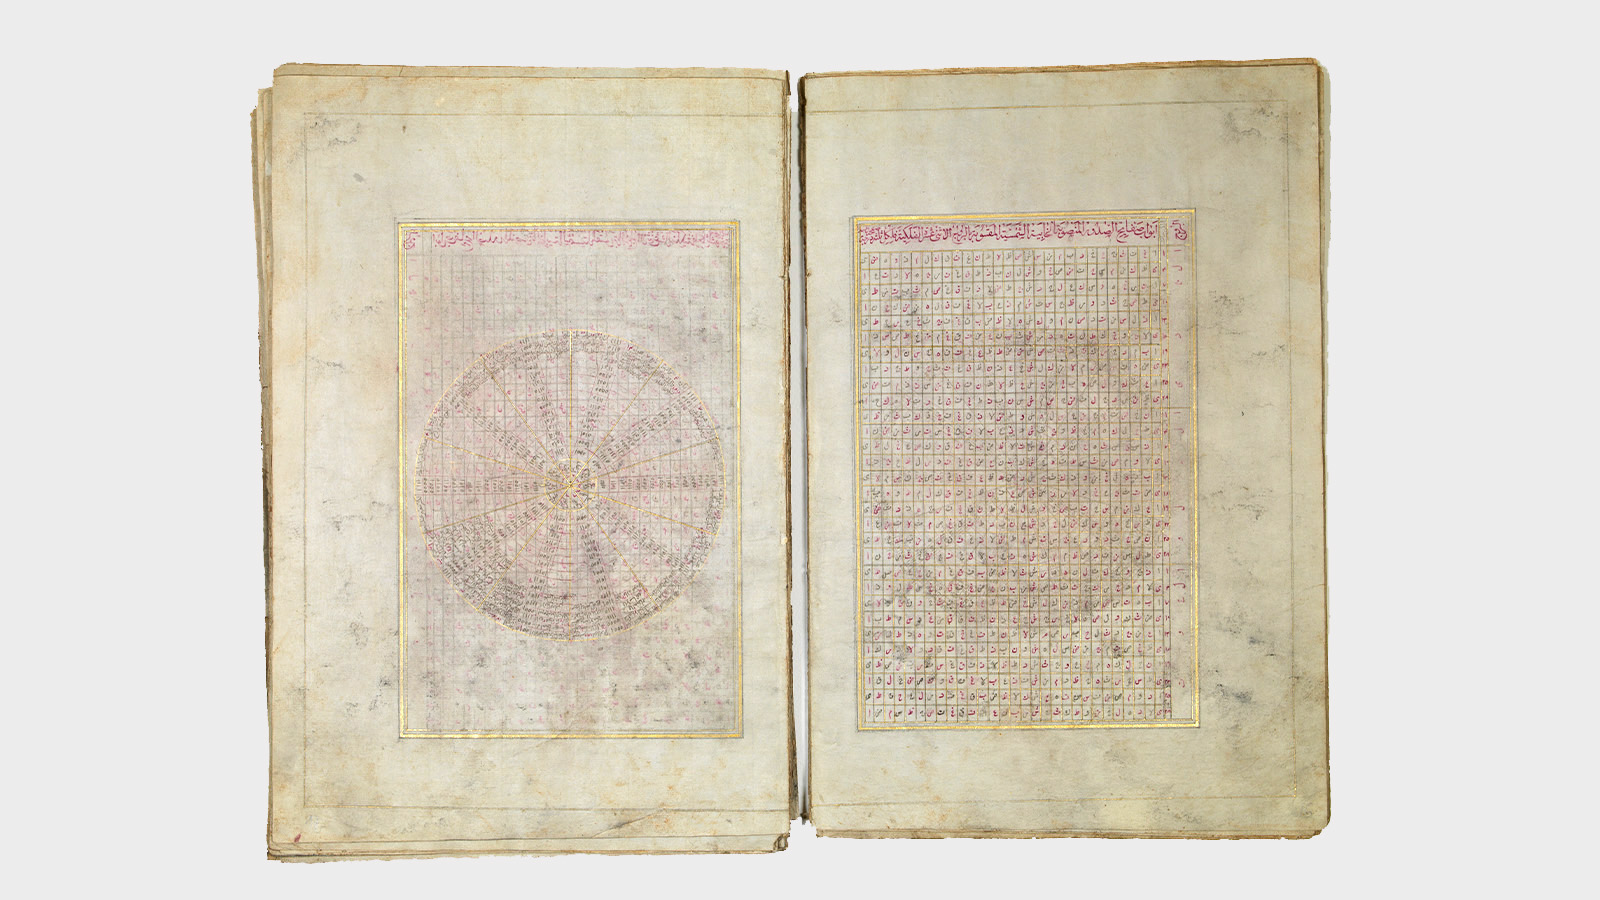 ‘The Emperor’s Gift: Circles of the Sciences and Tables of the Figures’.